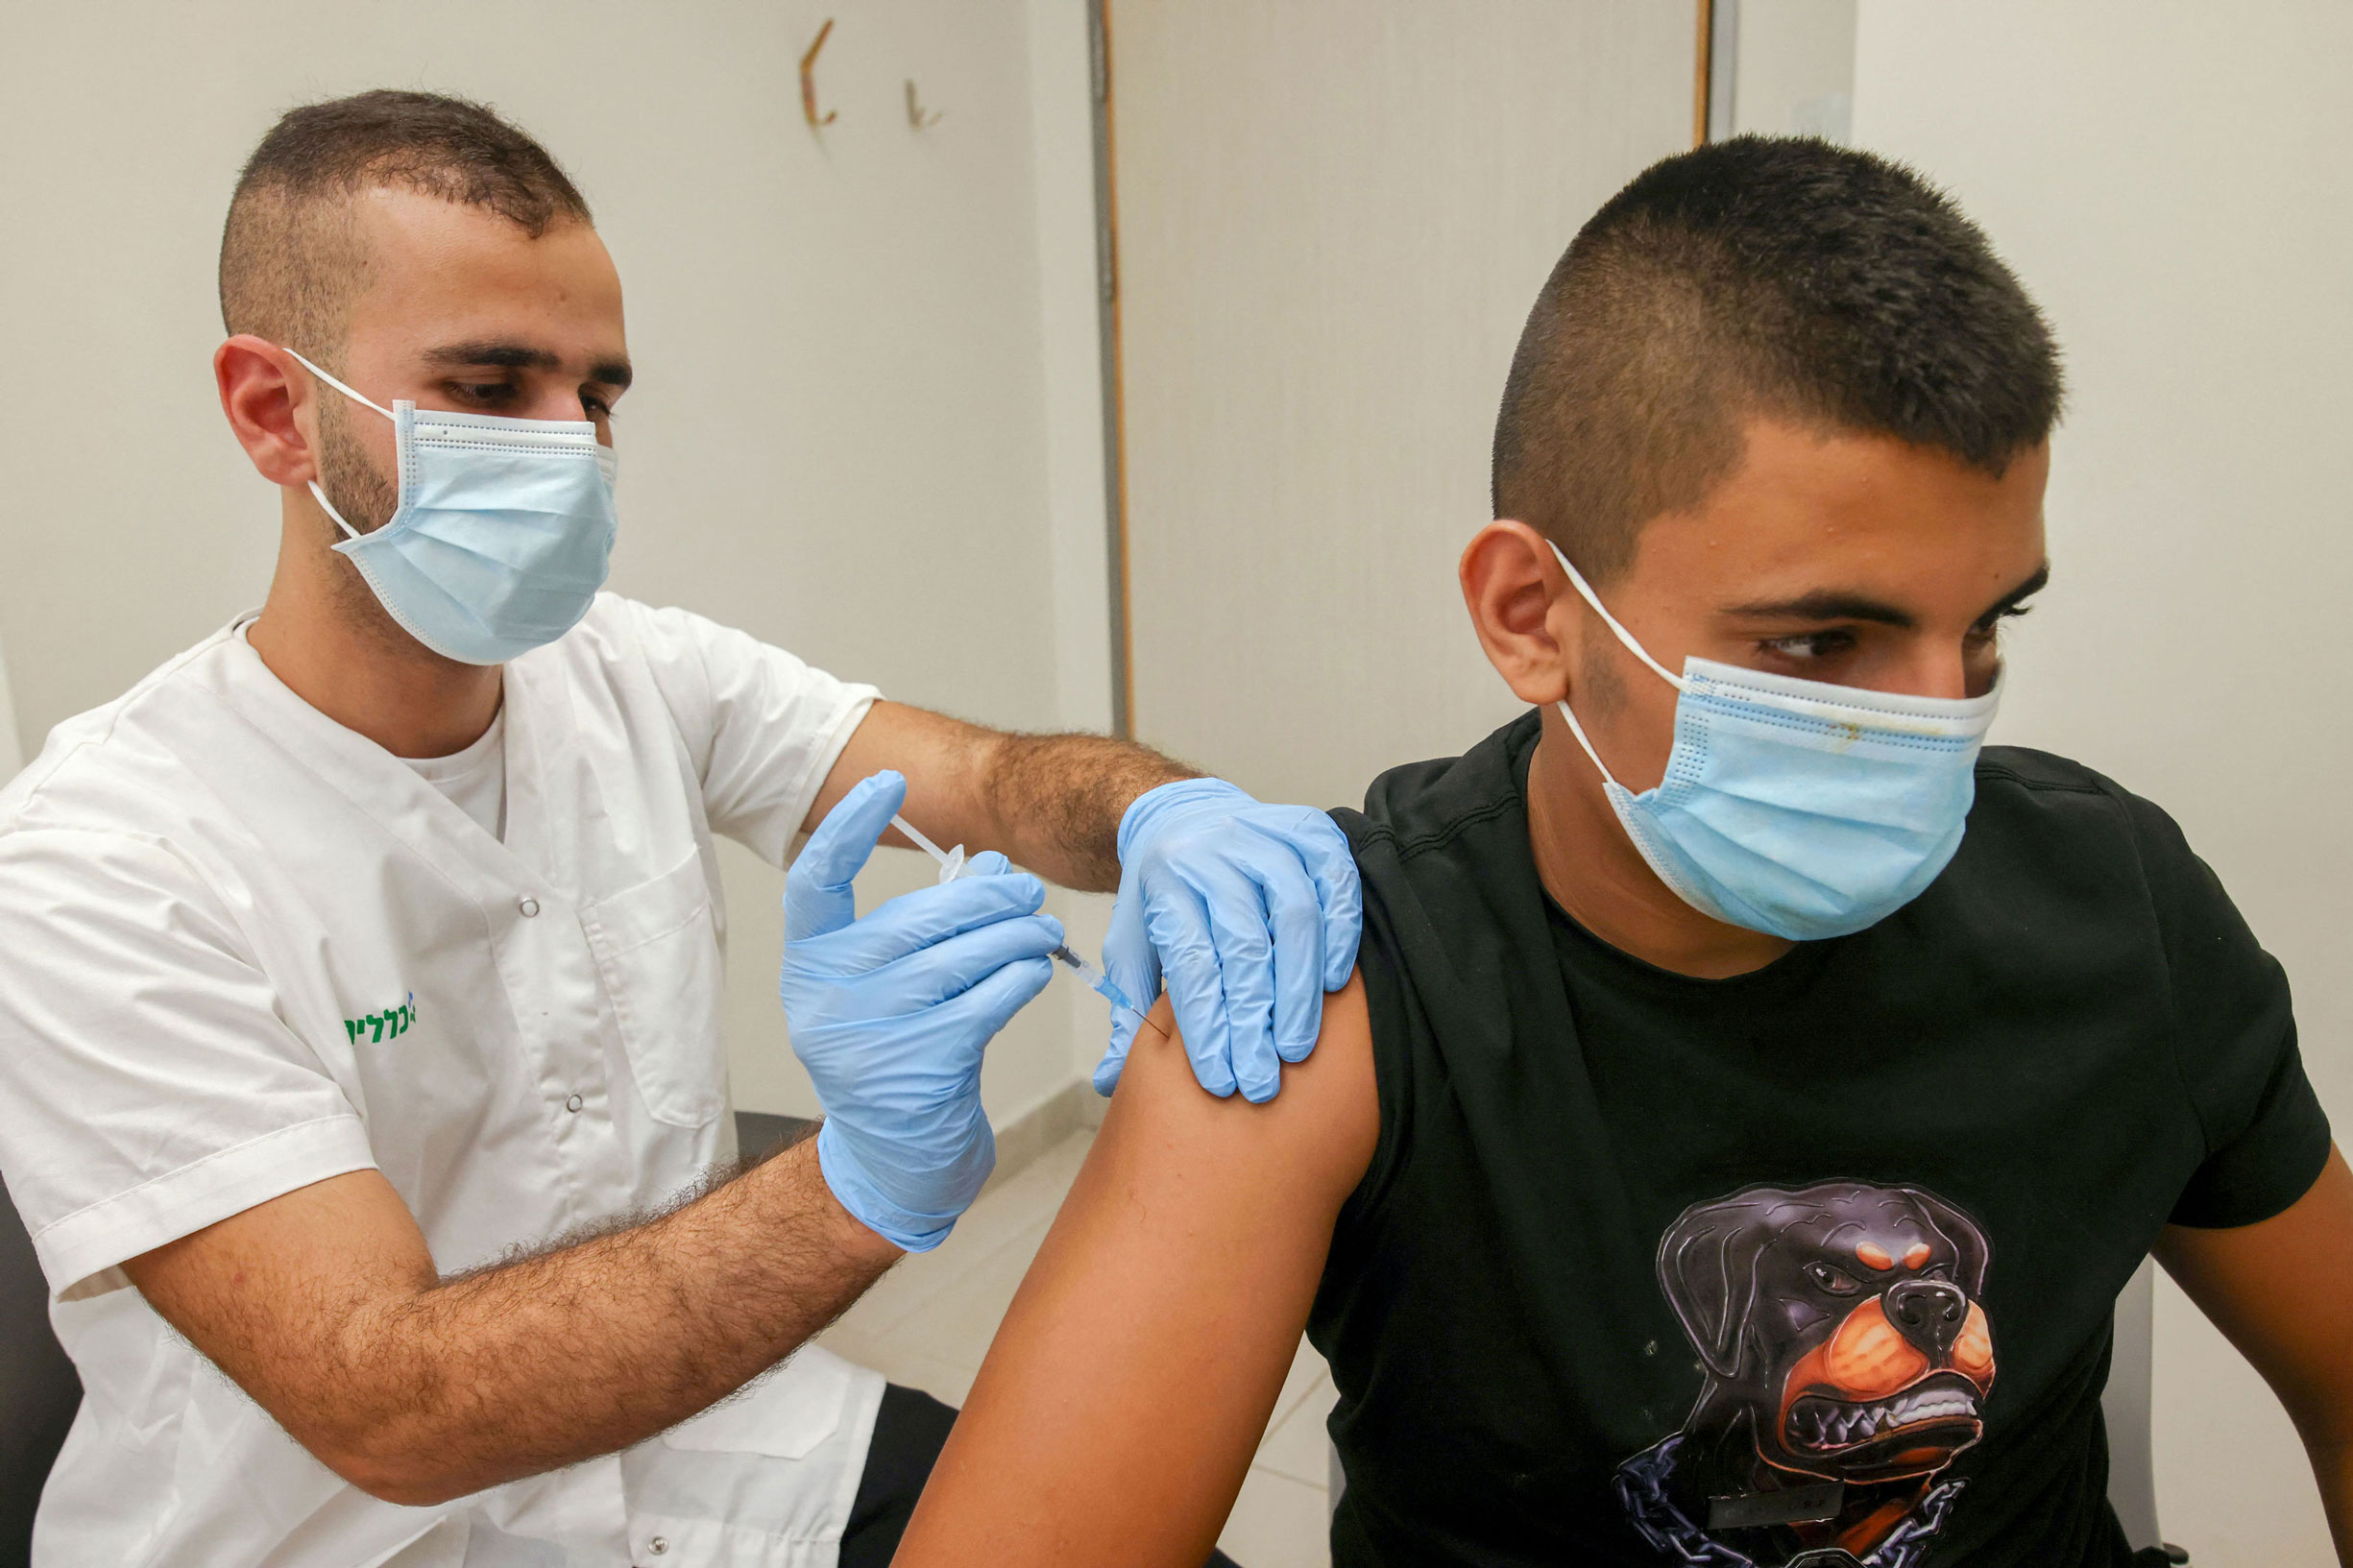 A health worker administers a dose of the Pfizer-BioNtech COVID-19 coronavirus vaccine on a man in Jerusalem on August 29, 2021